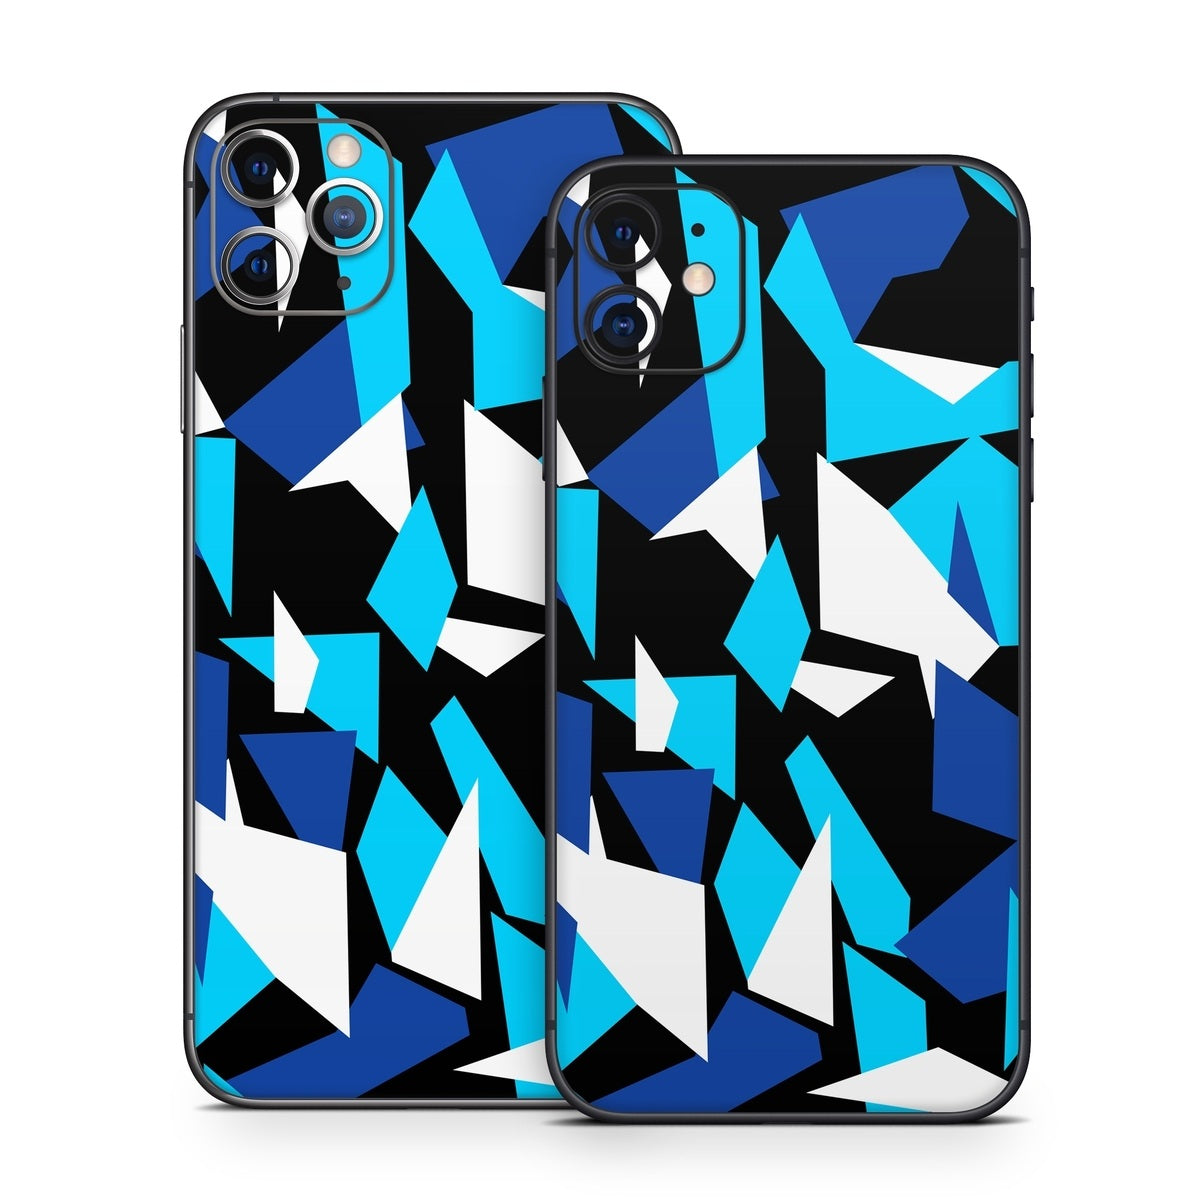 Raytracer - Apple iPhone 11 Skin